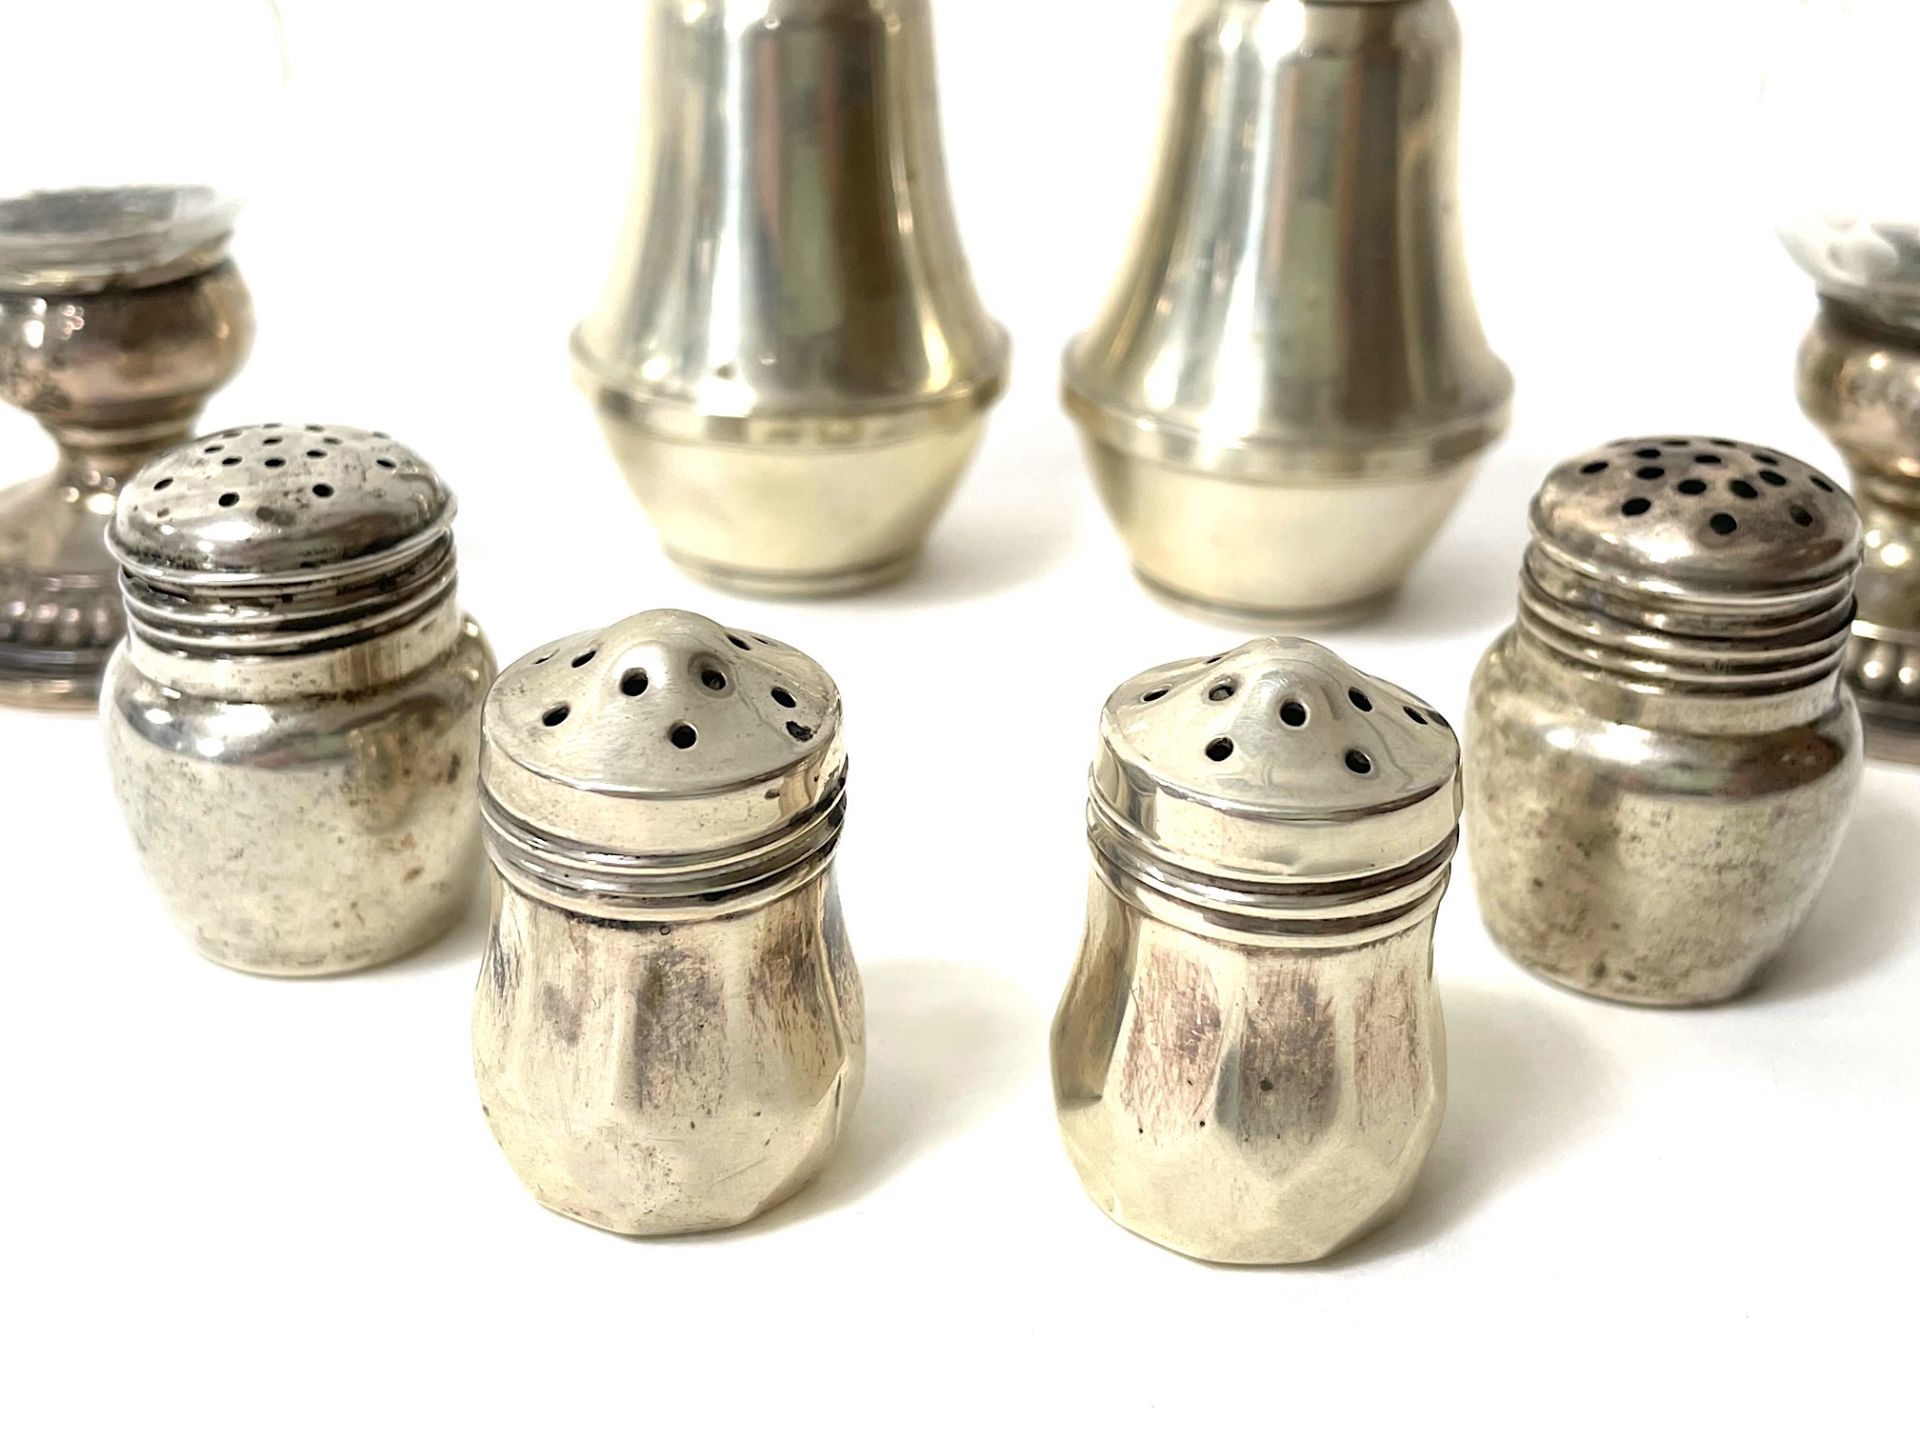 40 pairs of salt/pepper and spice shakers, - Image 18 of 88